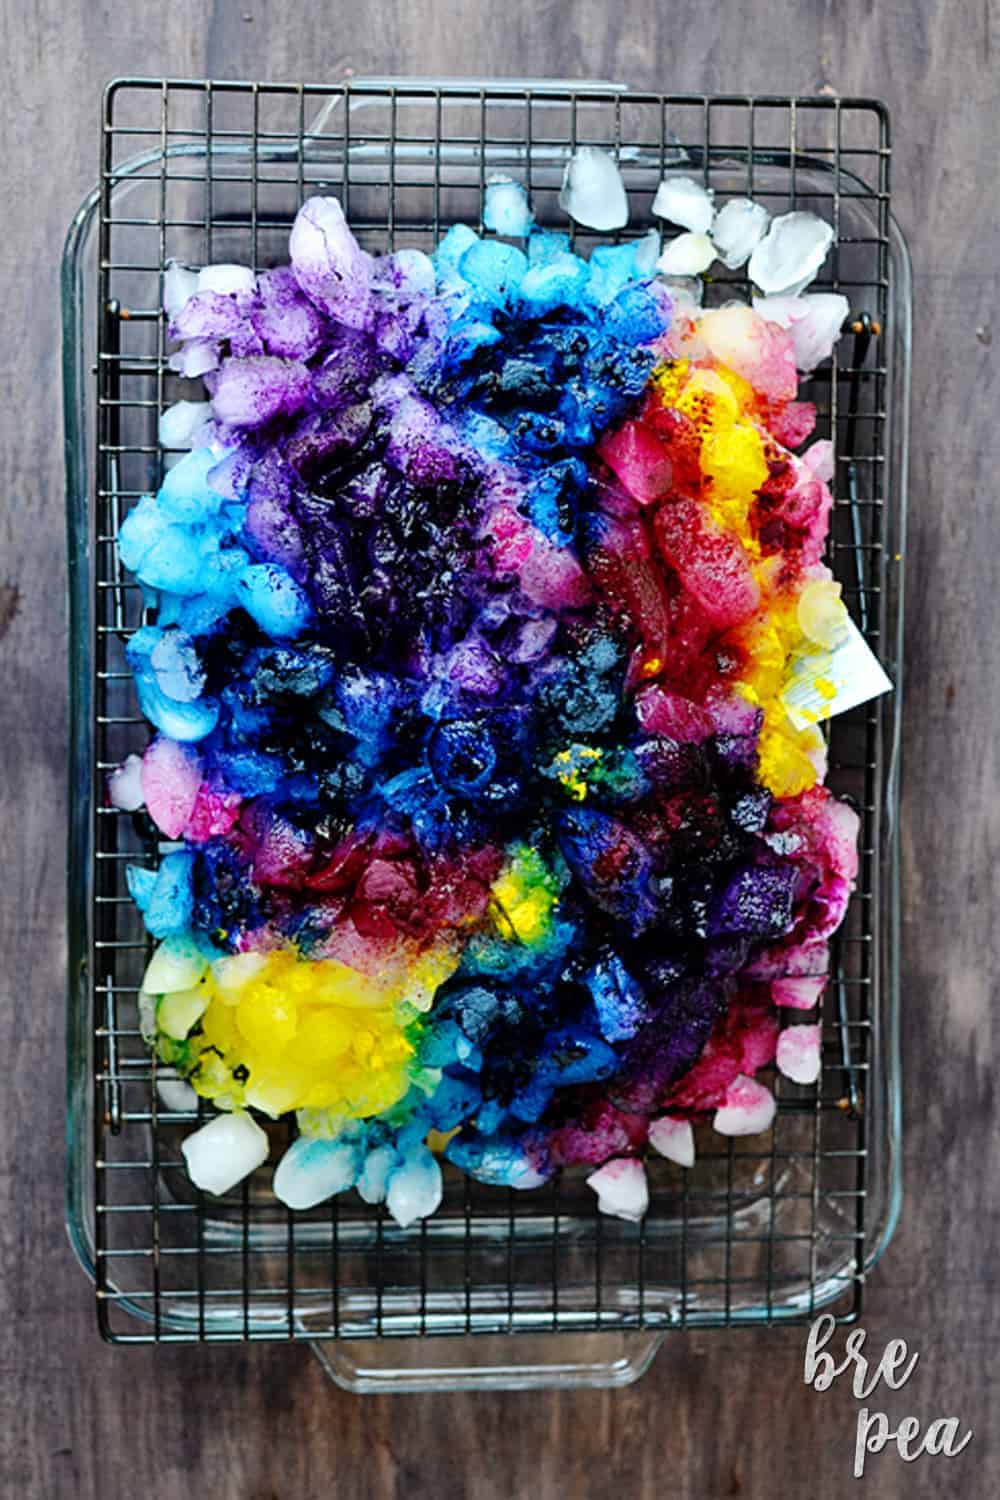 What is Tie Dyeing - What Does Tie Dye Mean